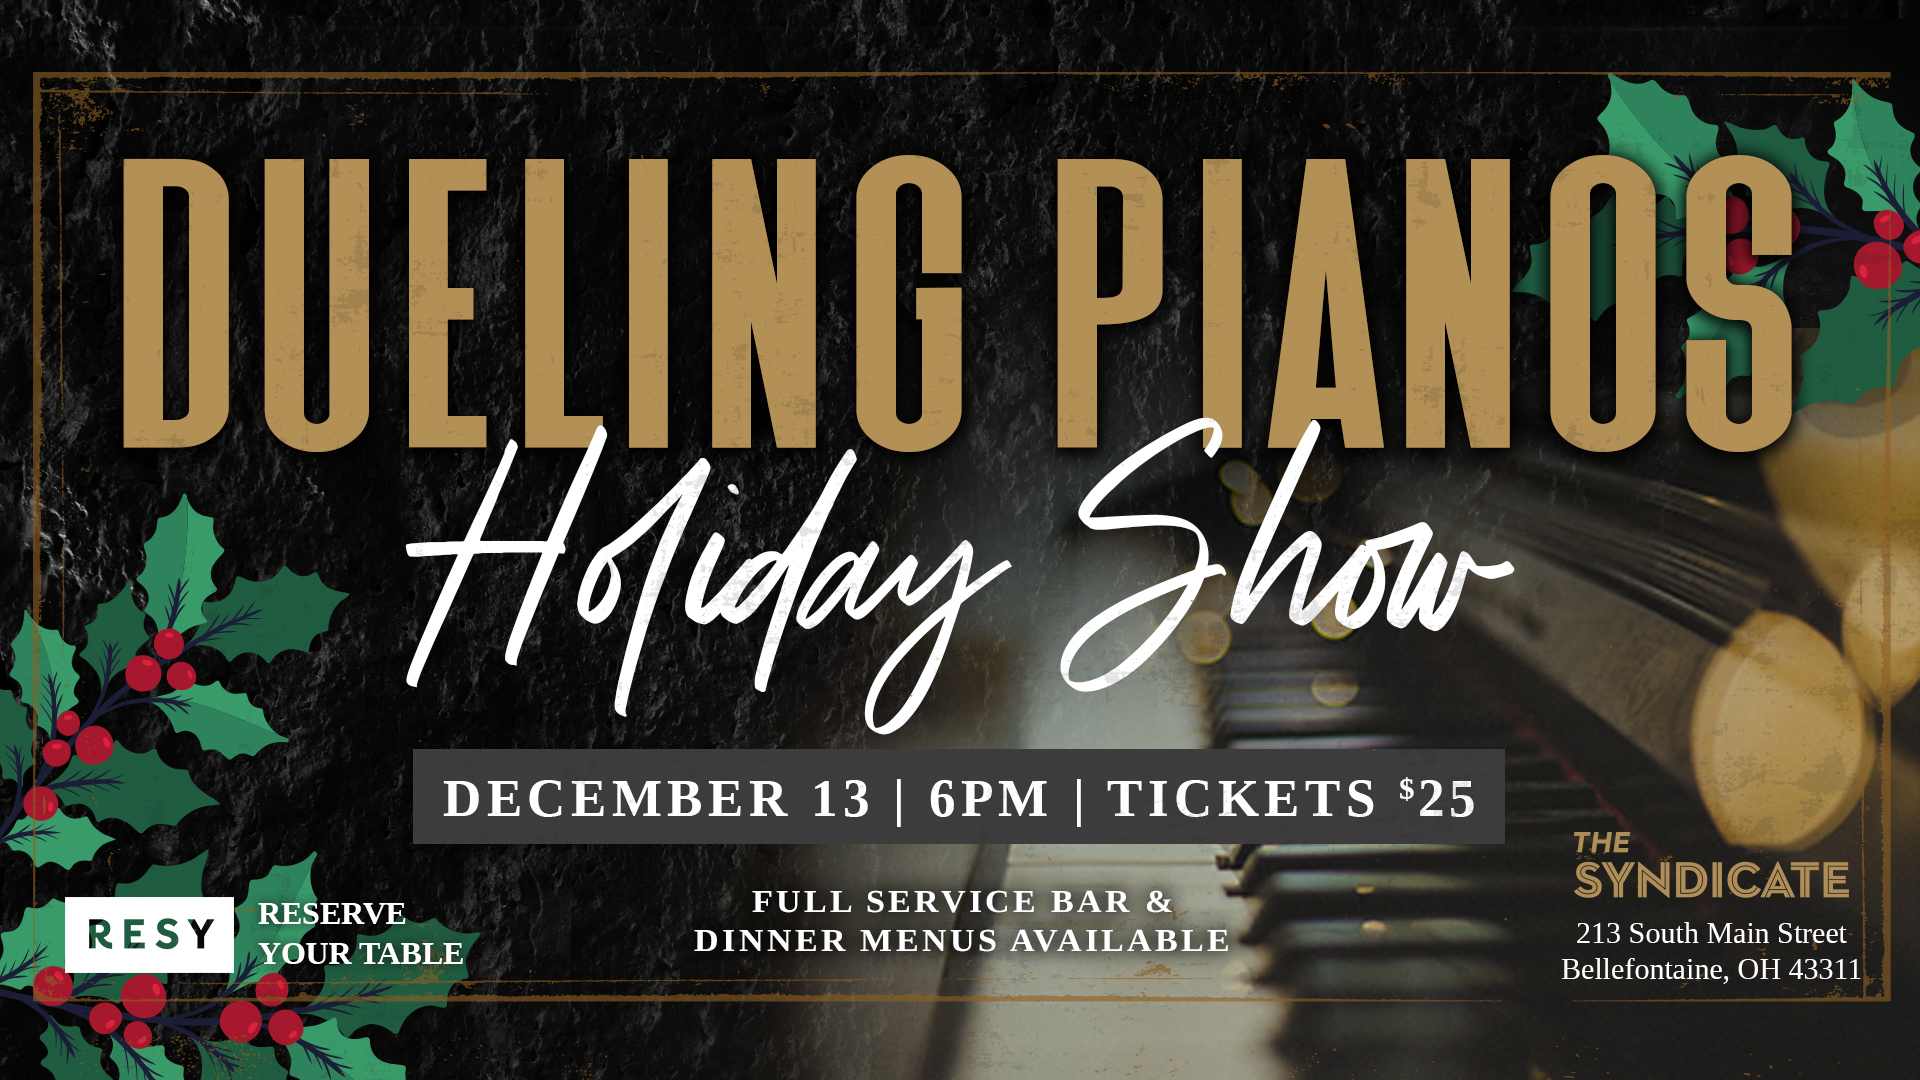 Holiday Dueling Pianos